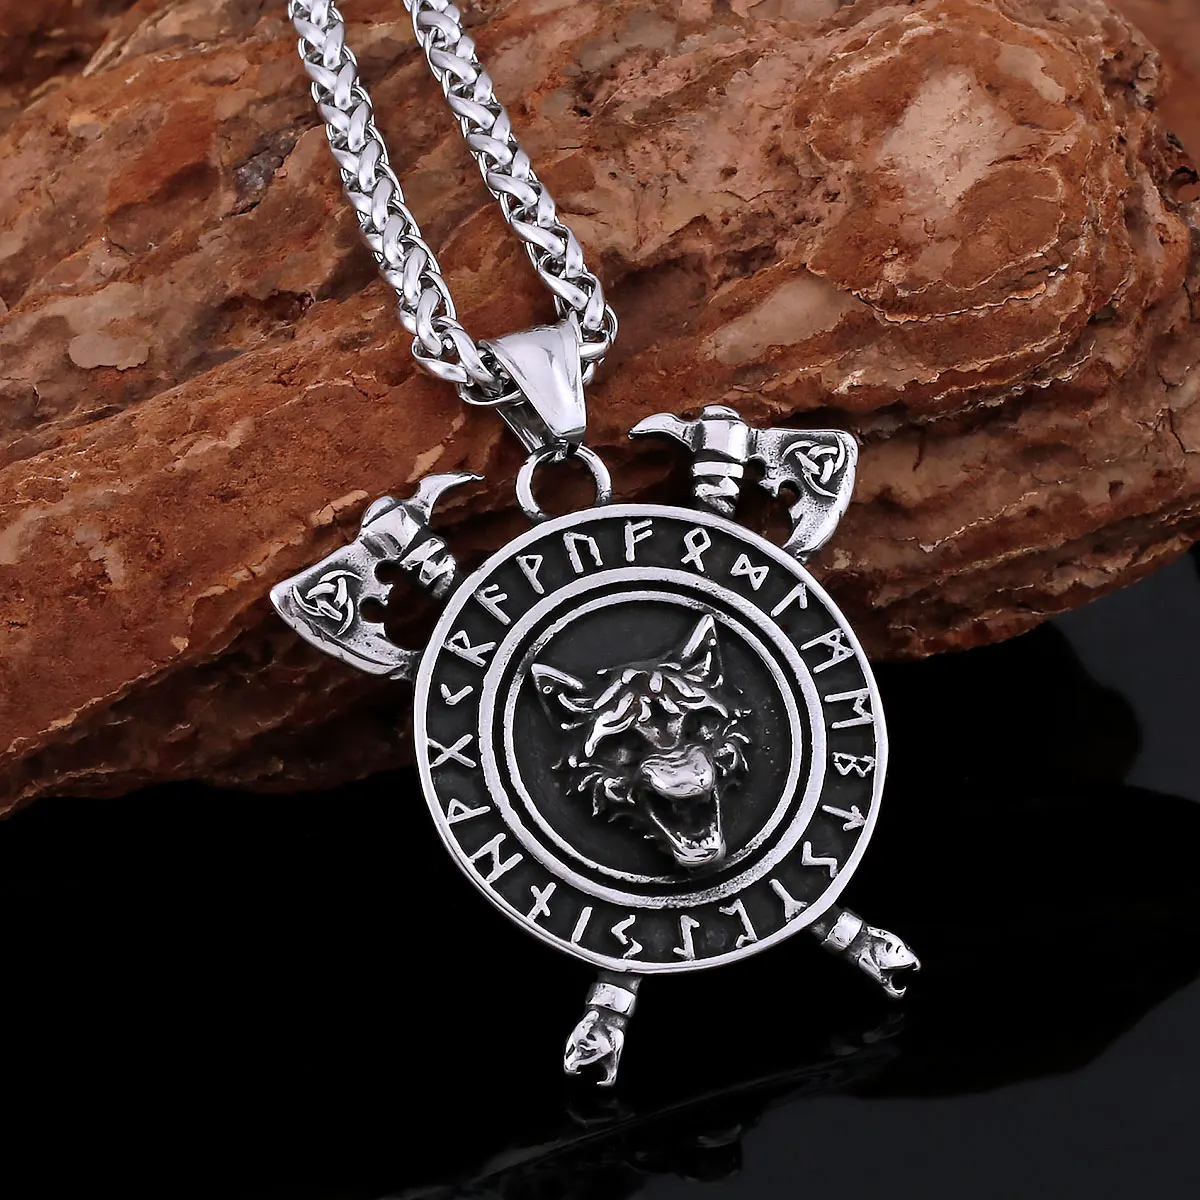 

Creative Retro Thor's Hammer Animal Viking Necklace Nordic Men's Stainless Steel Wolf Head Amulet Pendant Jewelry Charm Chain